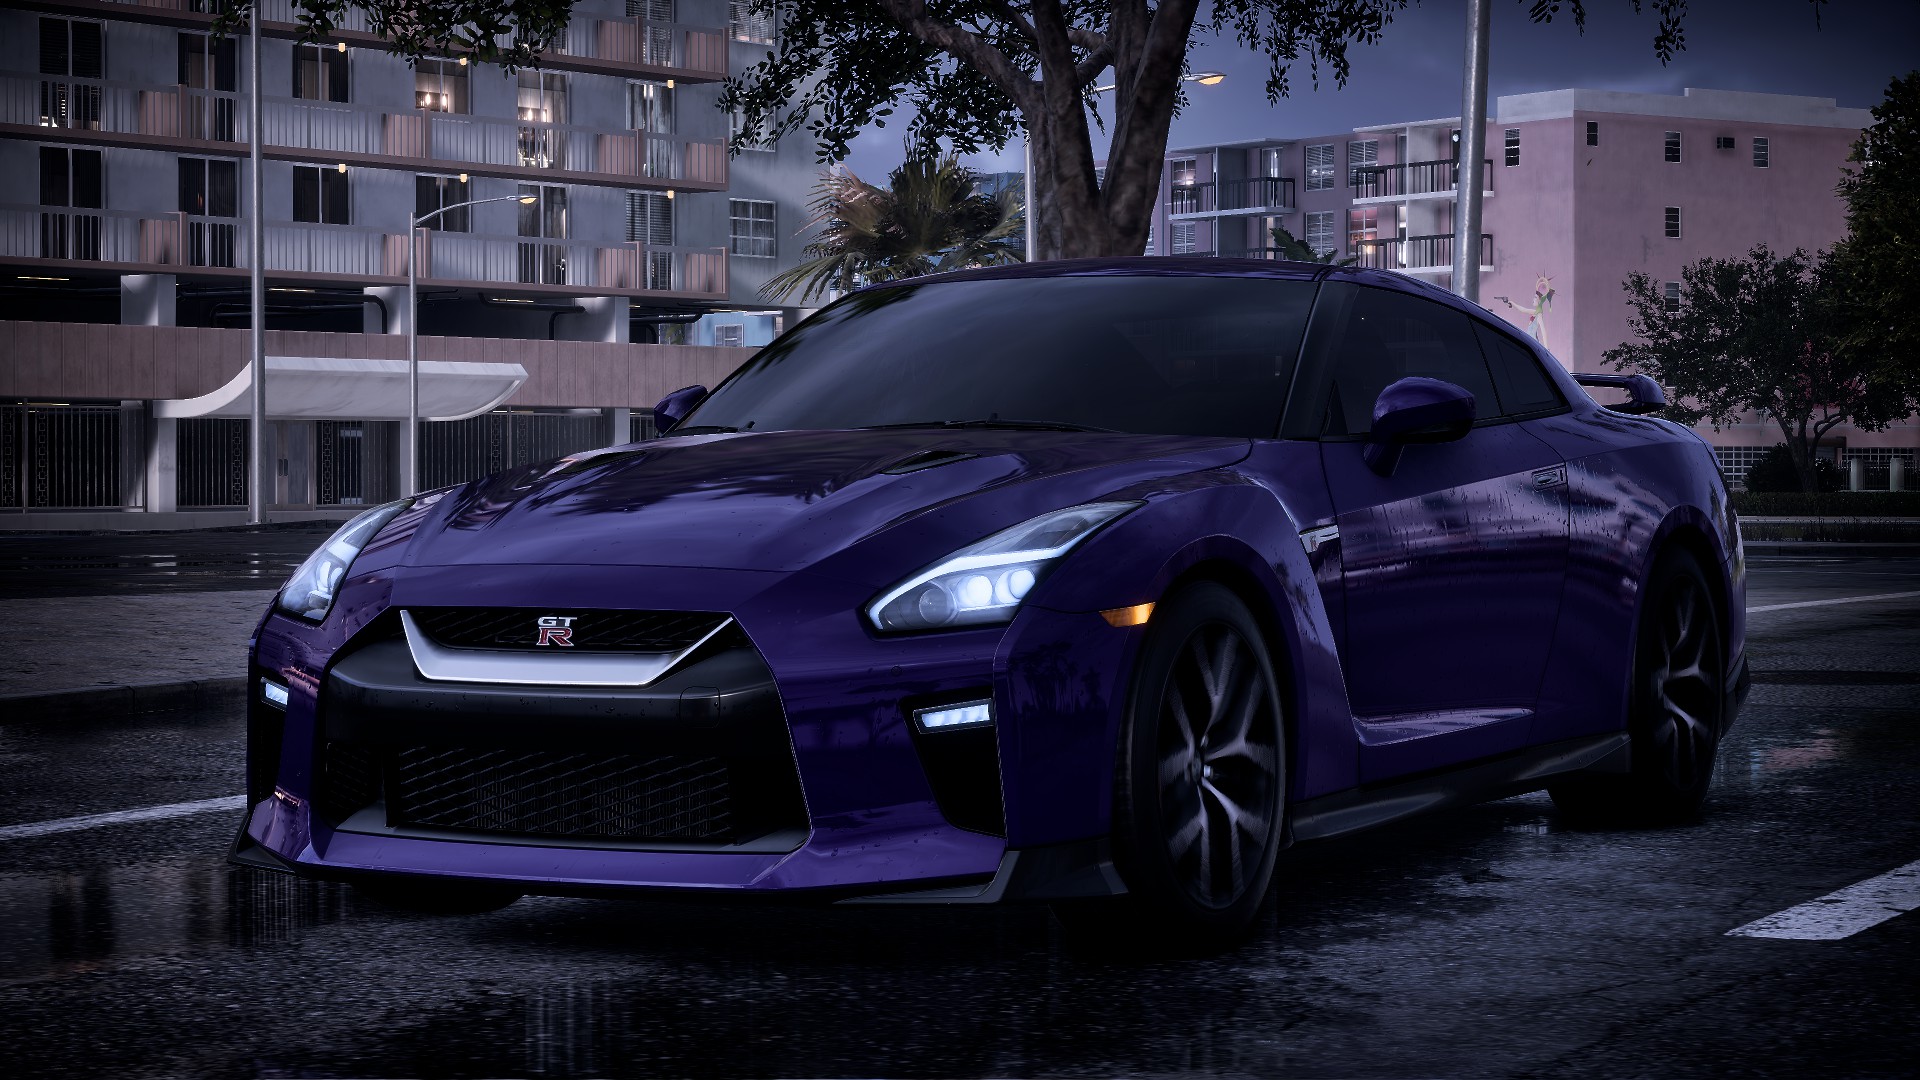 General 1920x1080 Nissan Nissan GT-R NISMO car 4K Need for Speed: Heat purple Japanese cars street view city